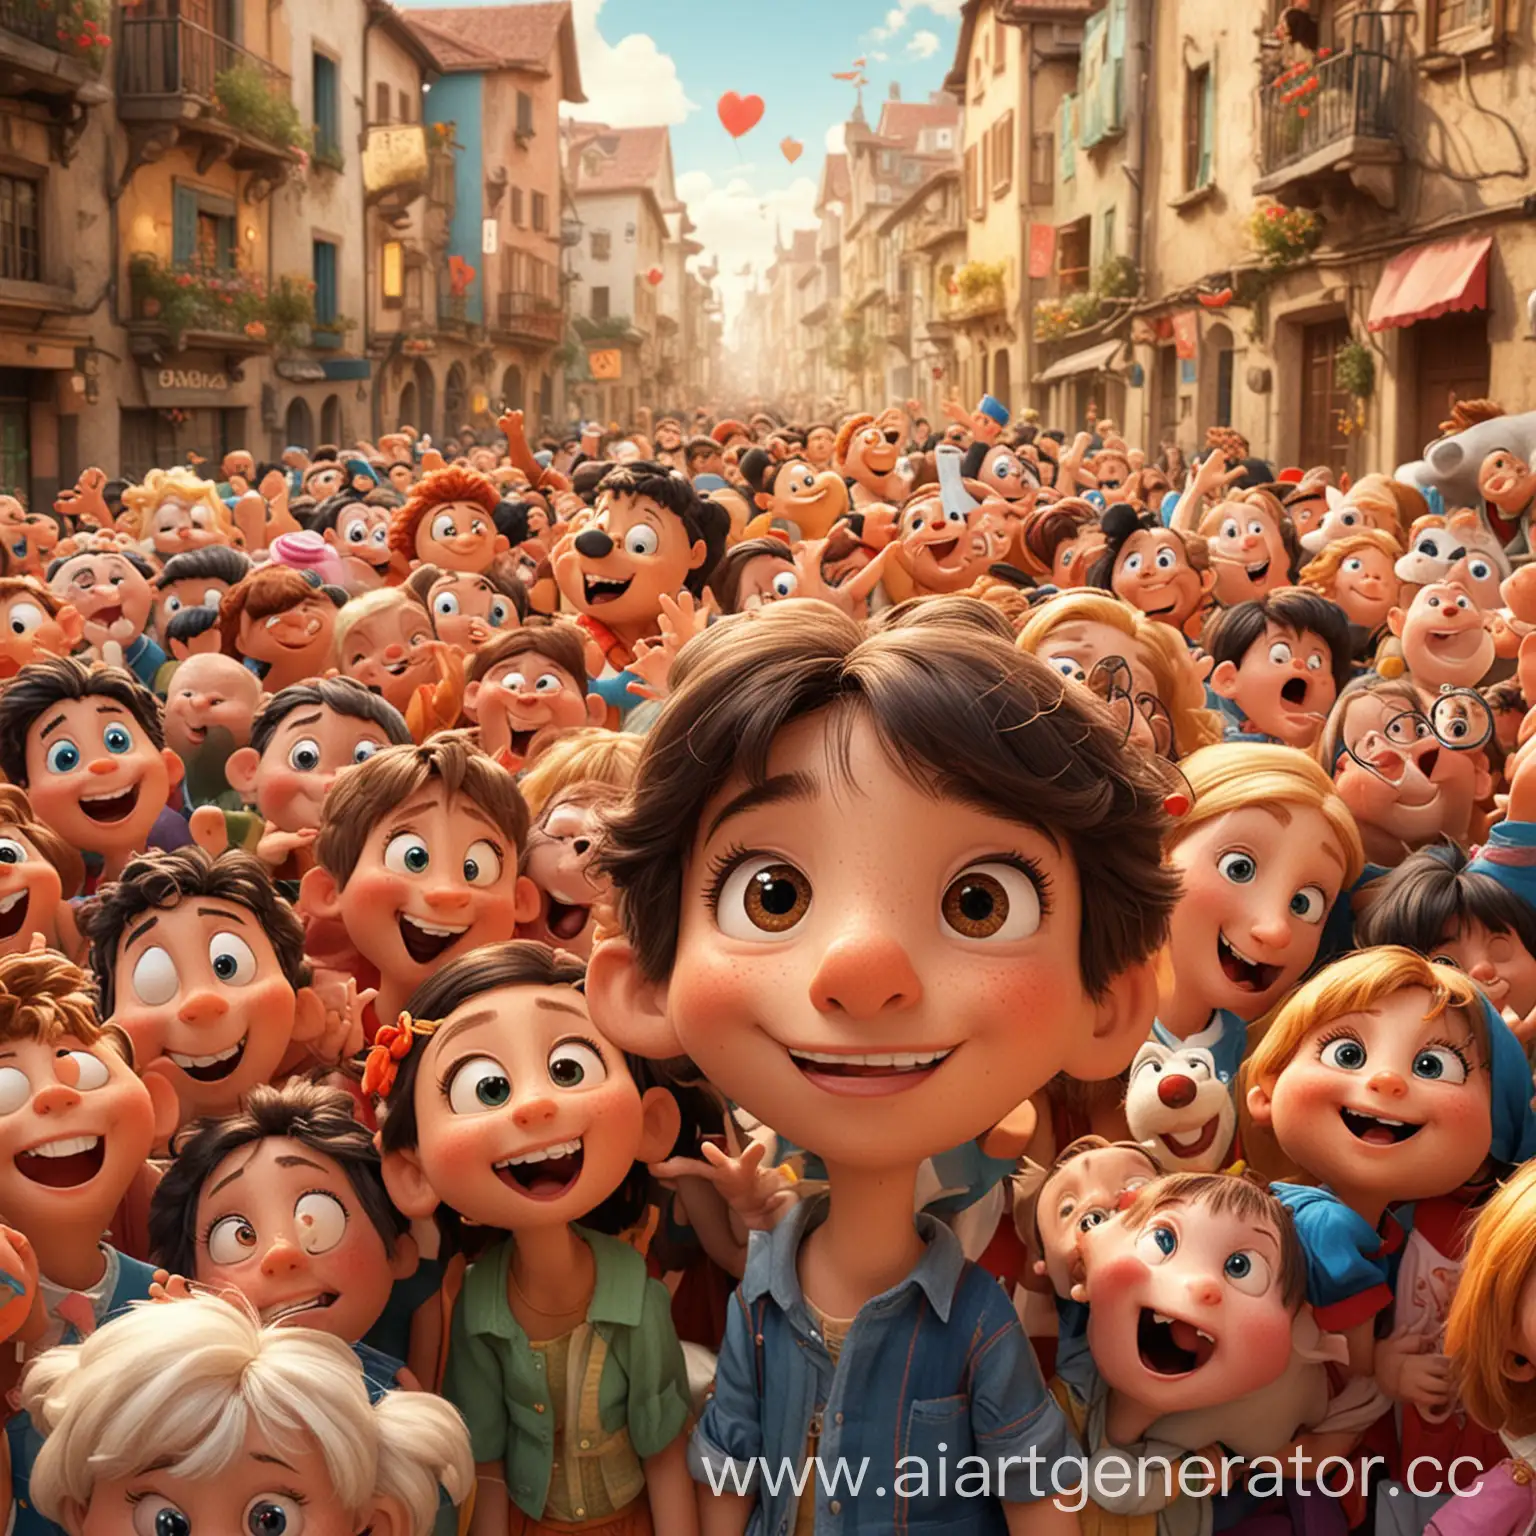 Beloved cartoon characters bring joy and creativity to audiences around the world.